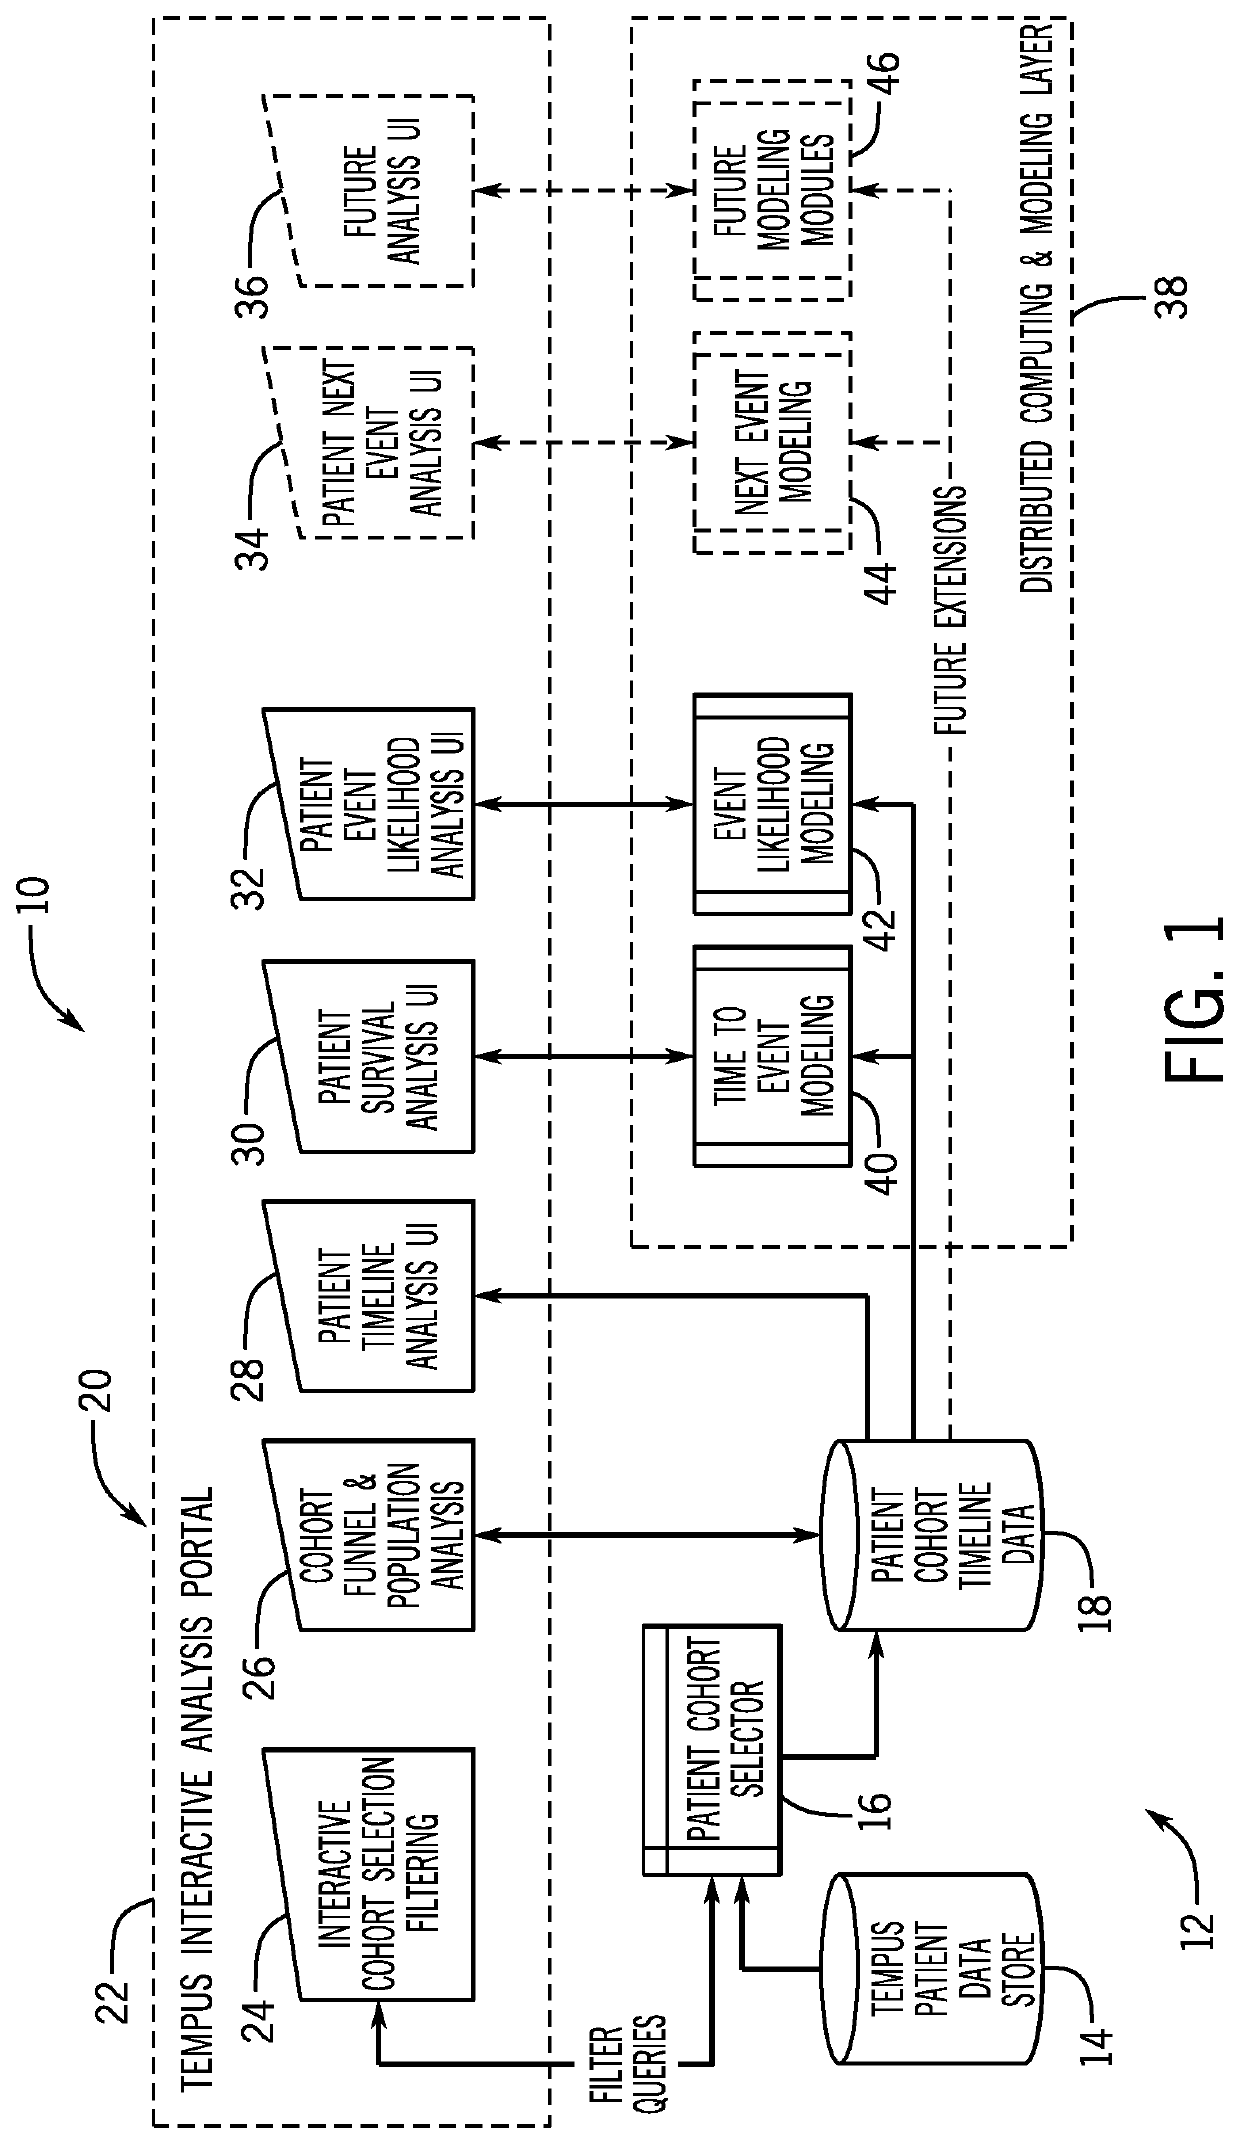 Method and process for predicting and analyzing patient cohort response, progression, and survival